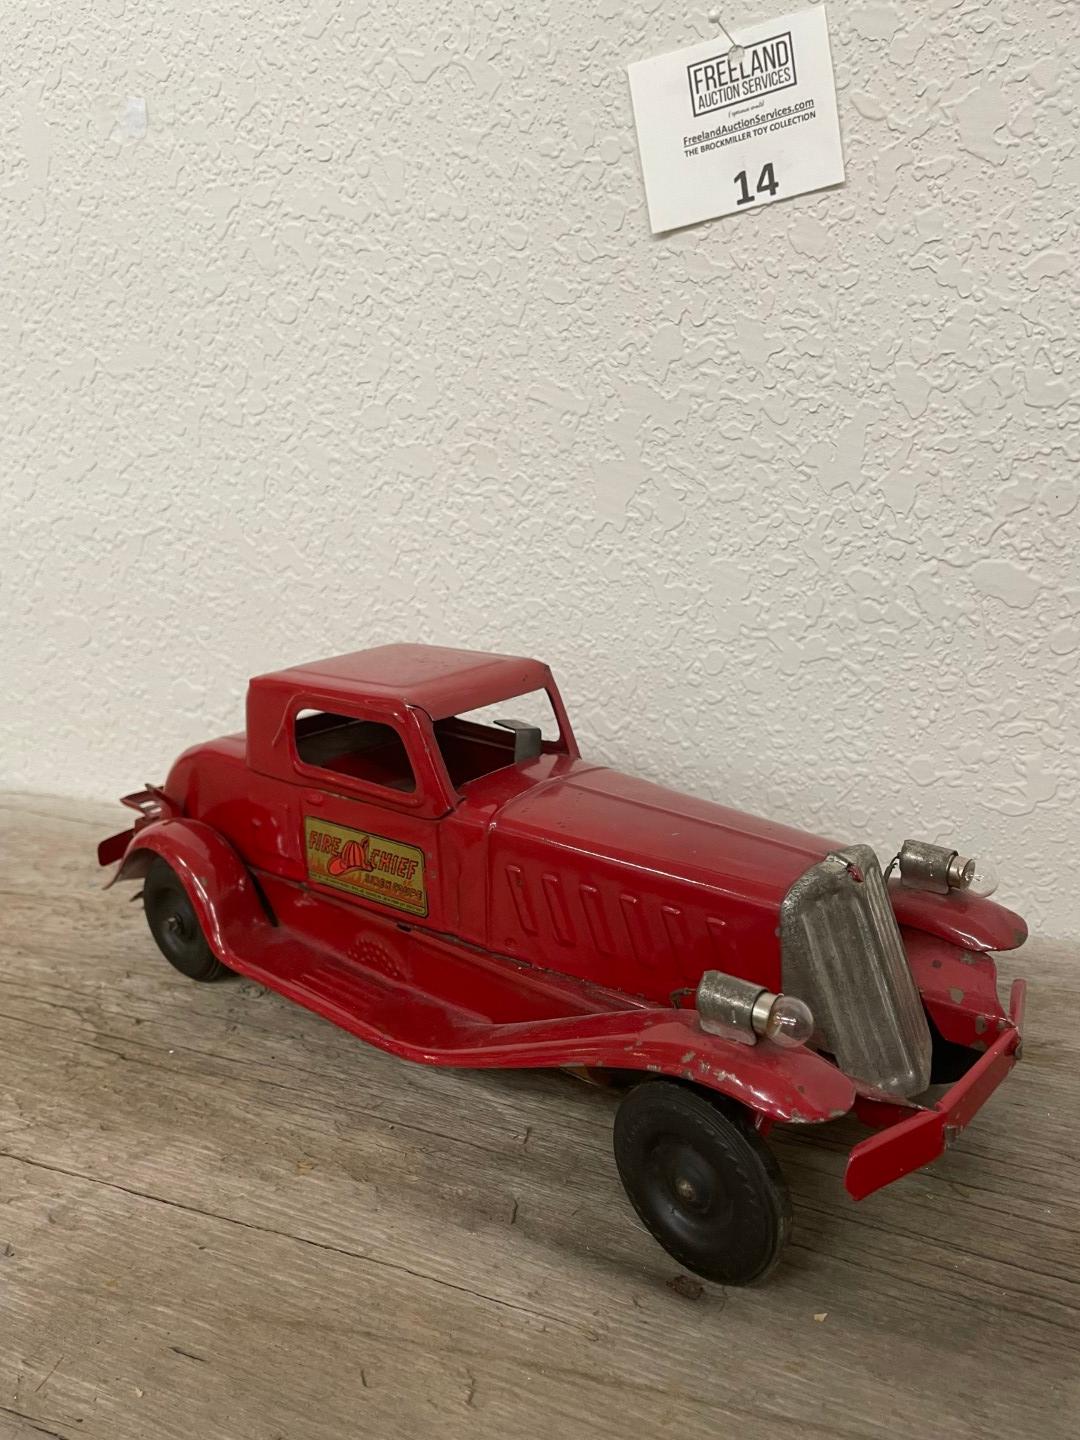 Girard Fire Chief Siren Coupe made in New York